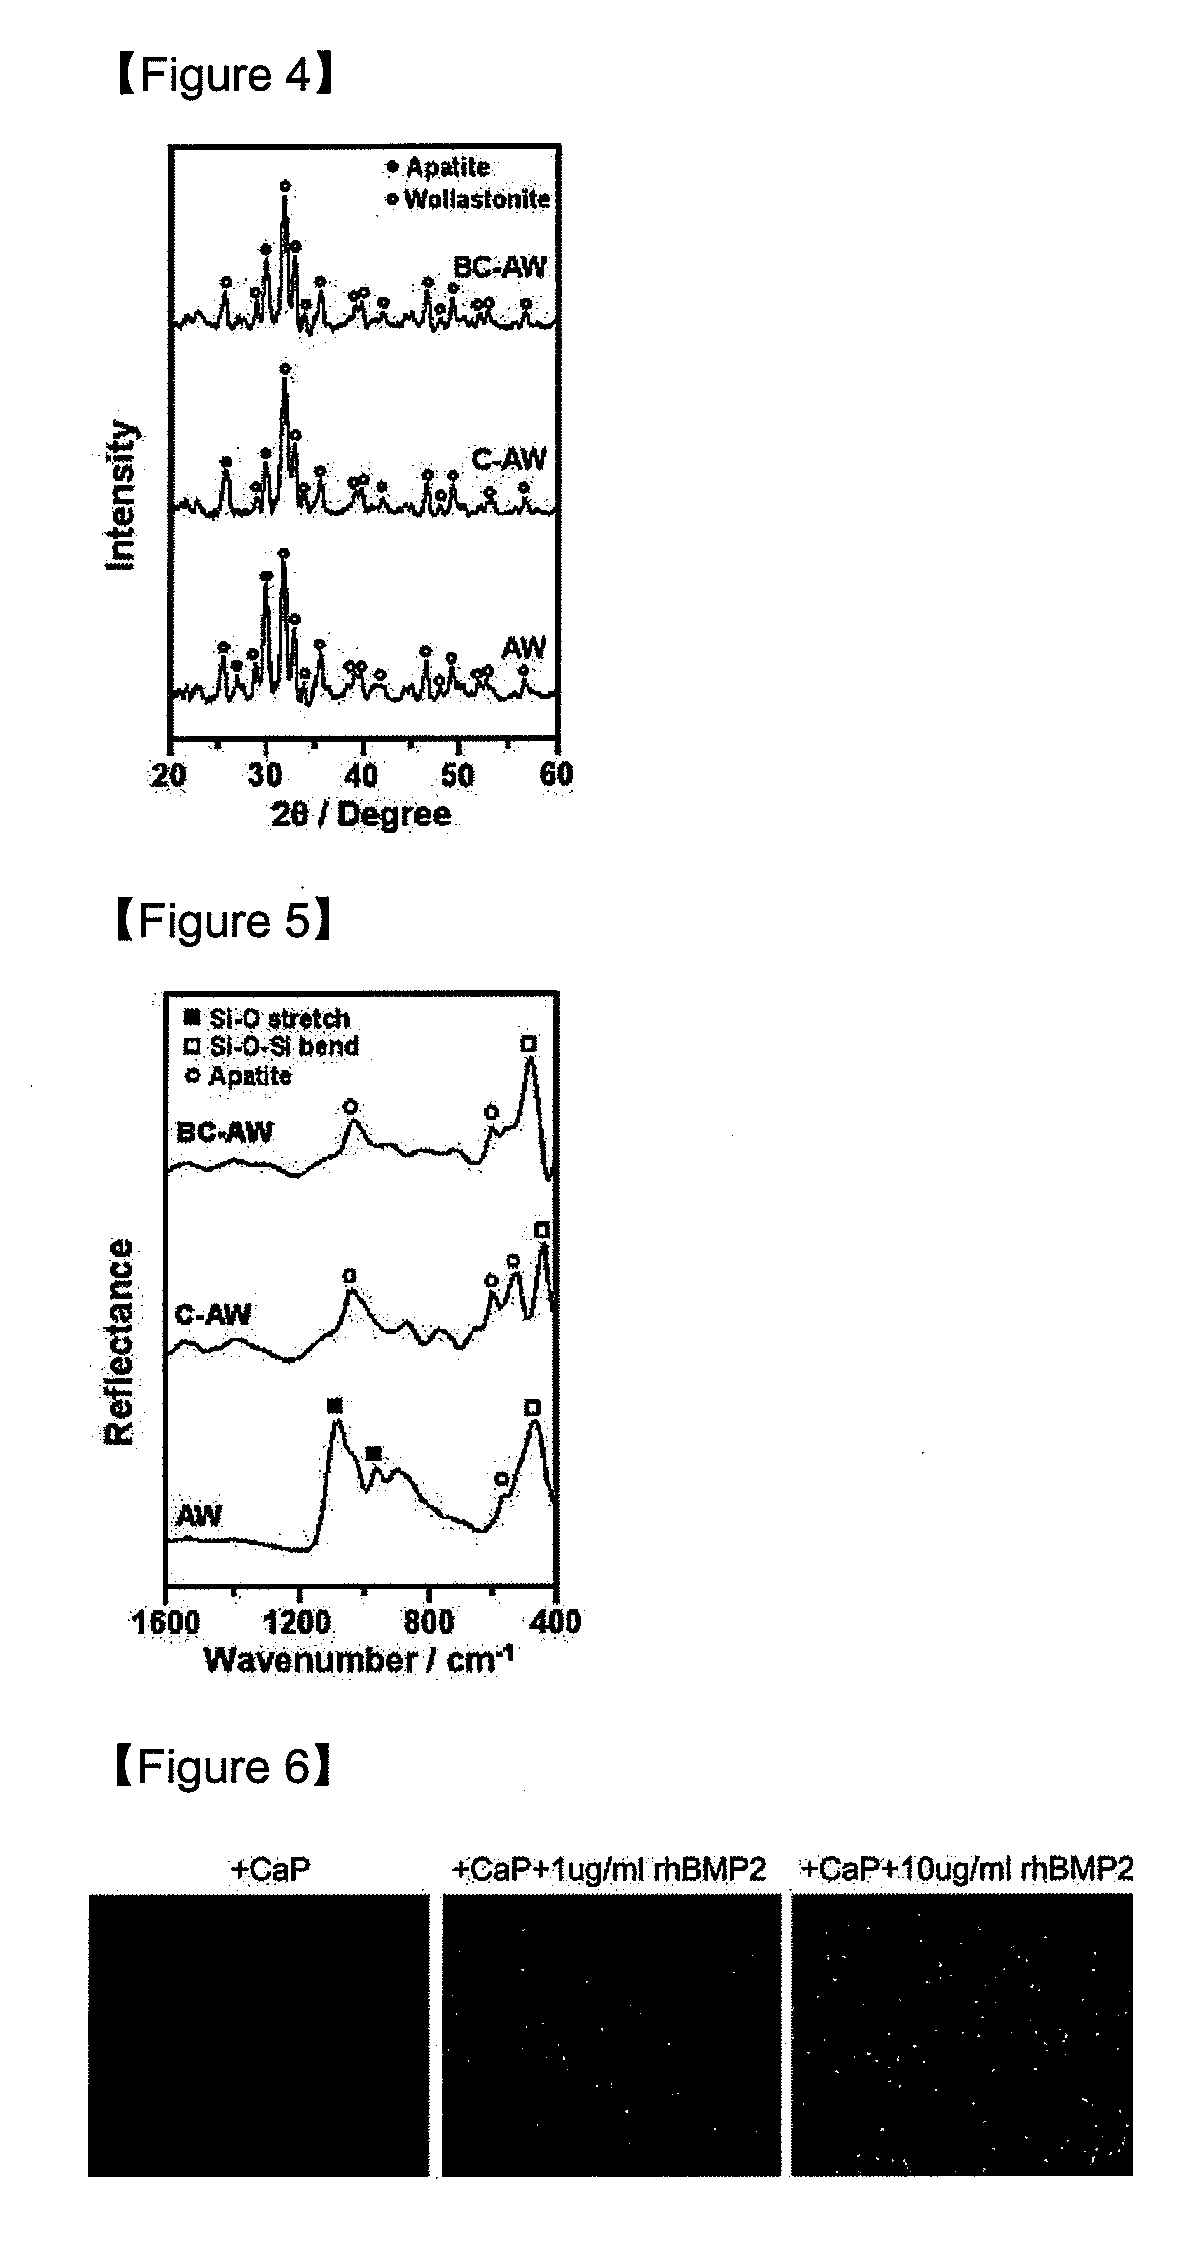 Material and manufacturing method of bioactive protein-calcium phosphate composite